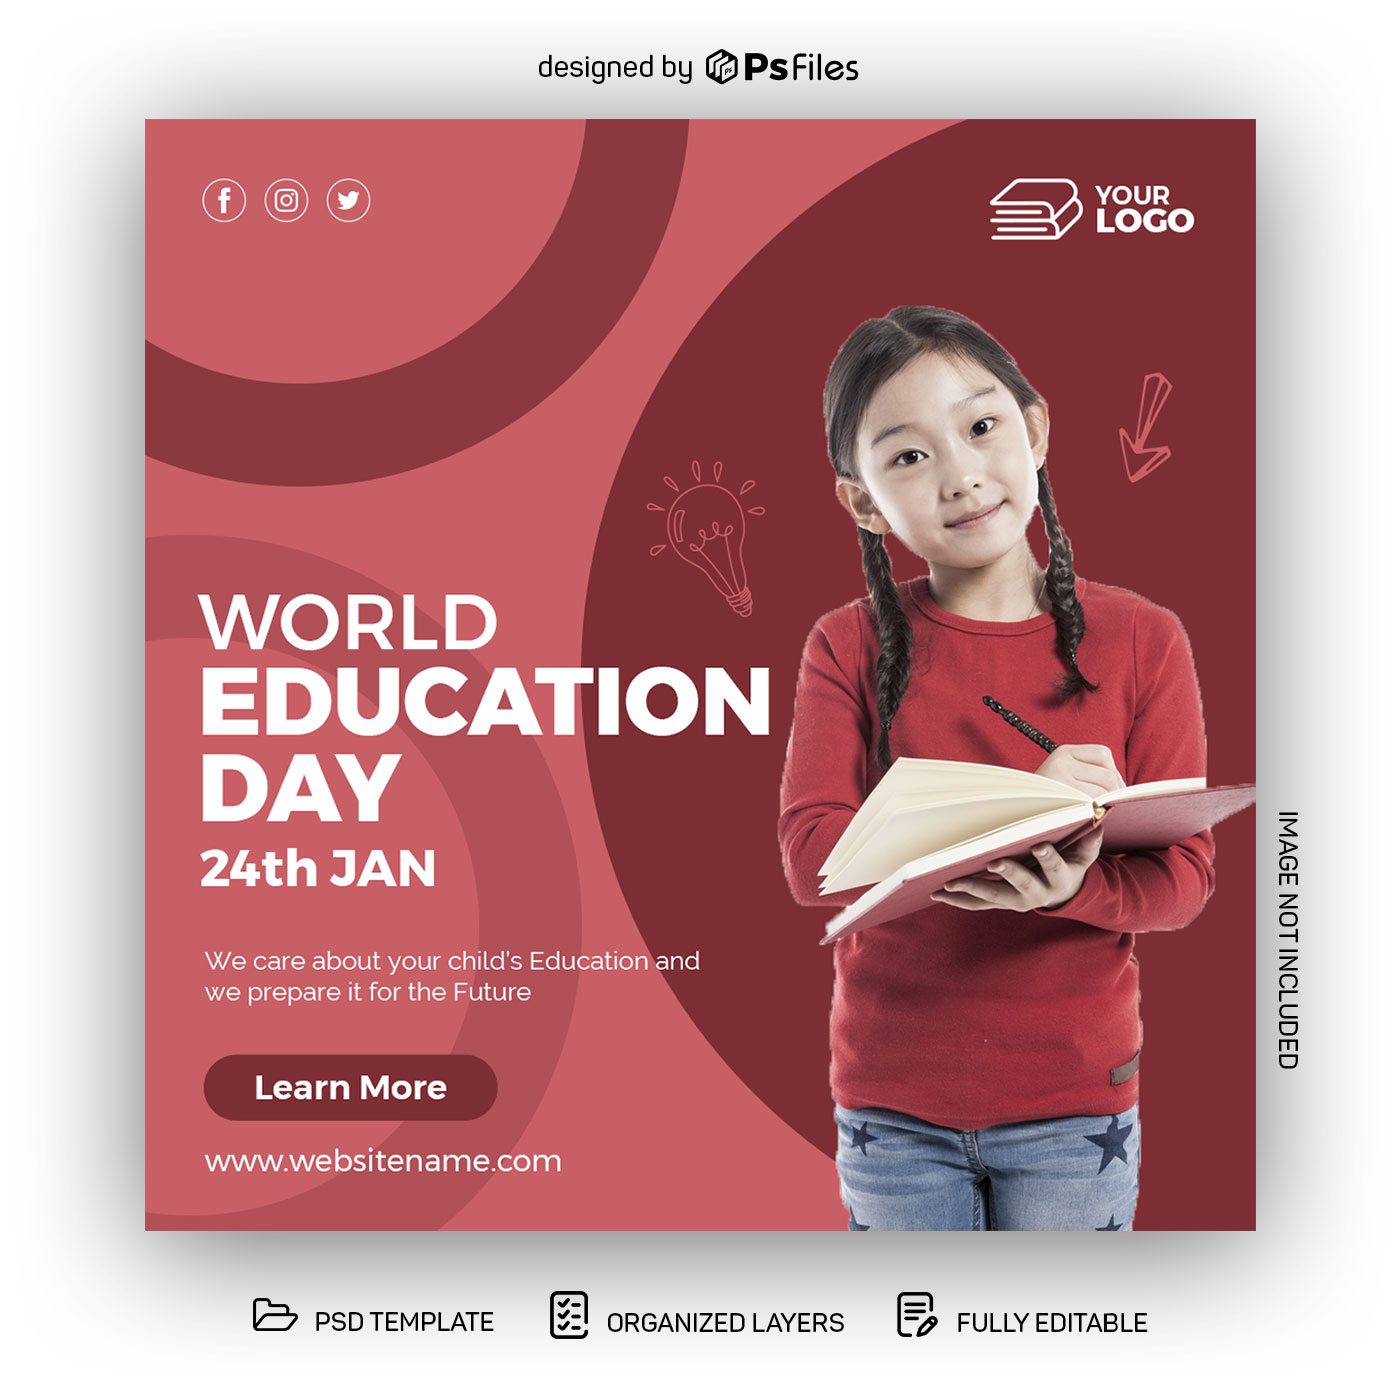 World Education Day Social Media Post PSD Template for Free - PsFiles